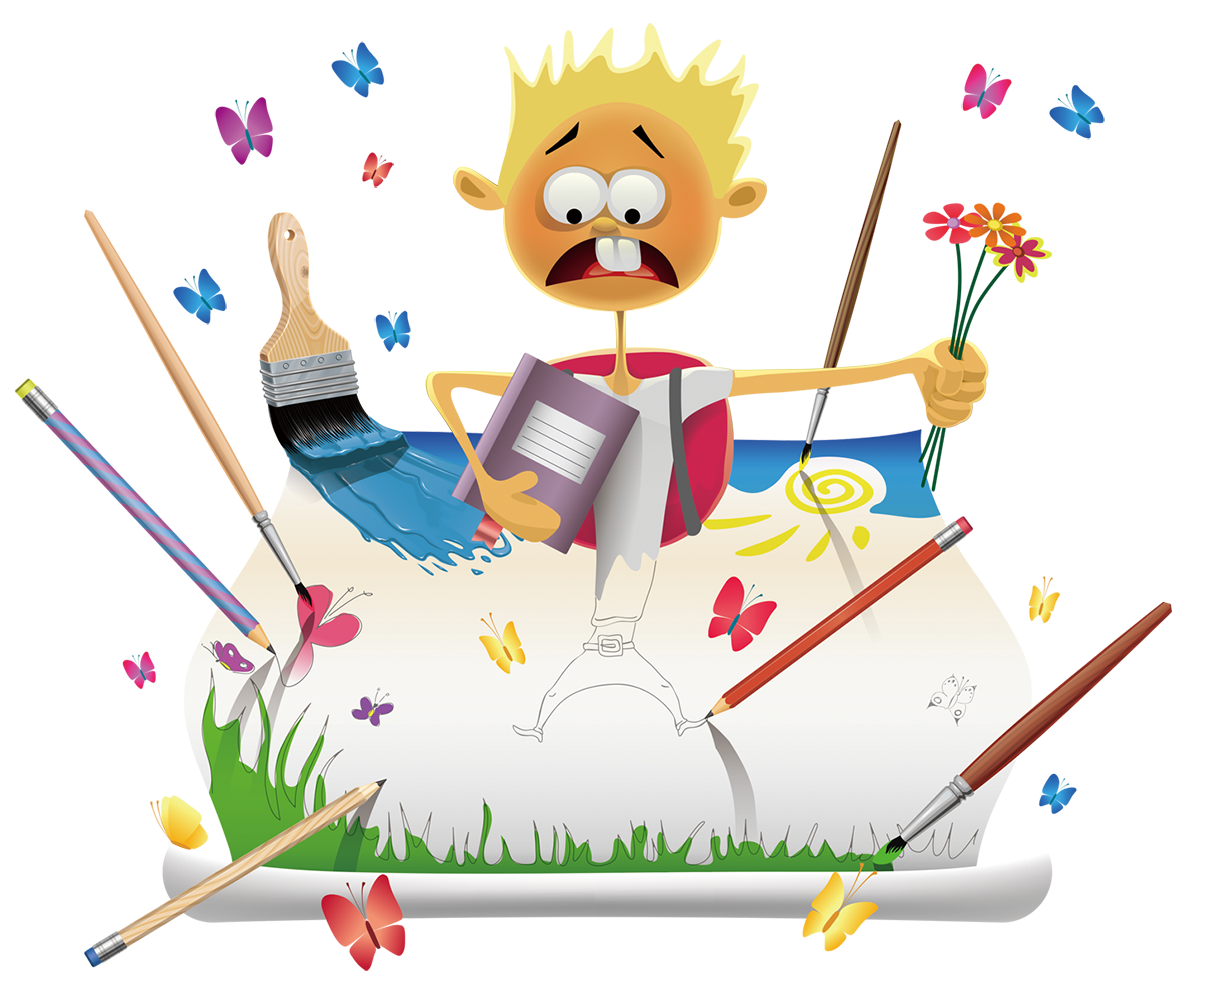 painting clipart toddler painting